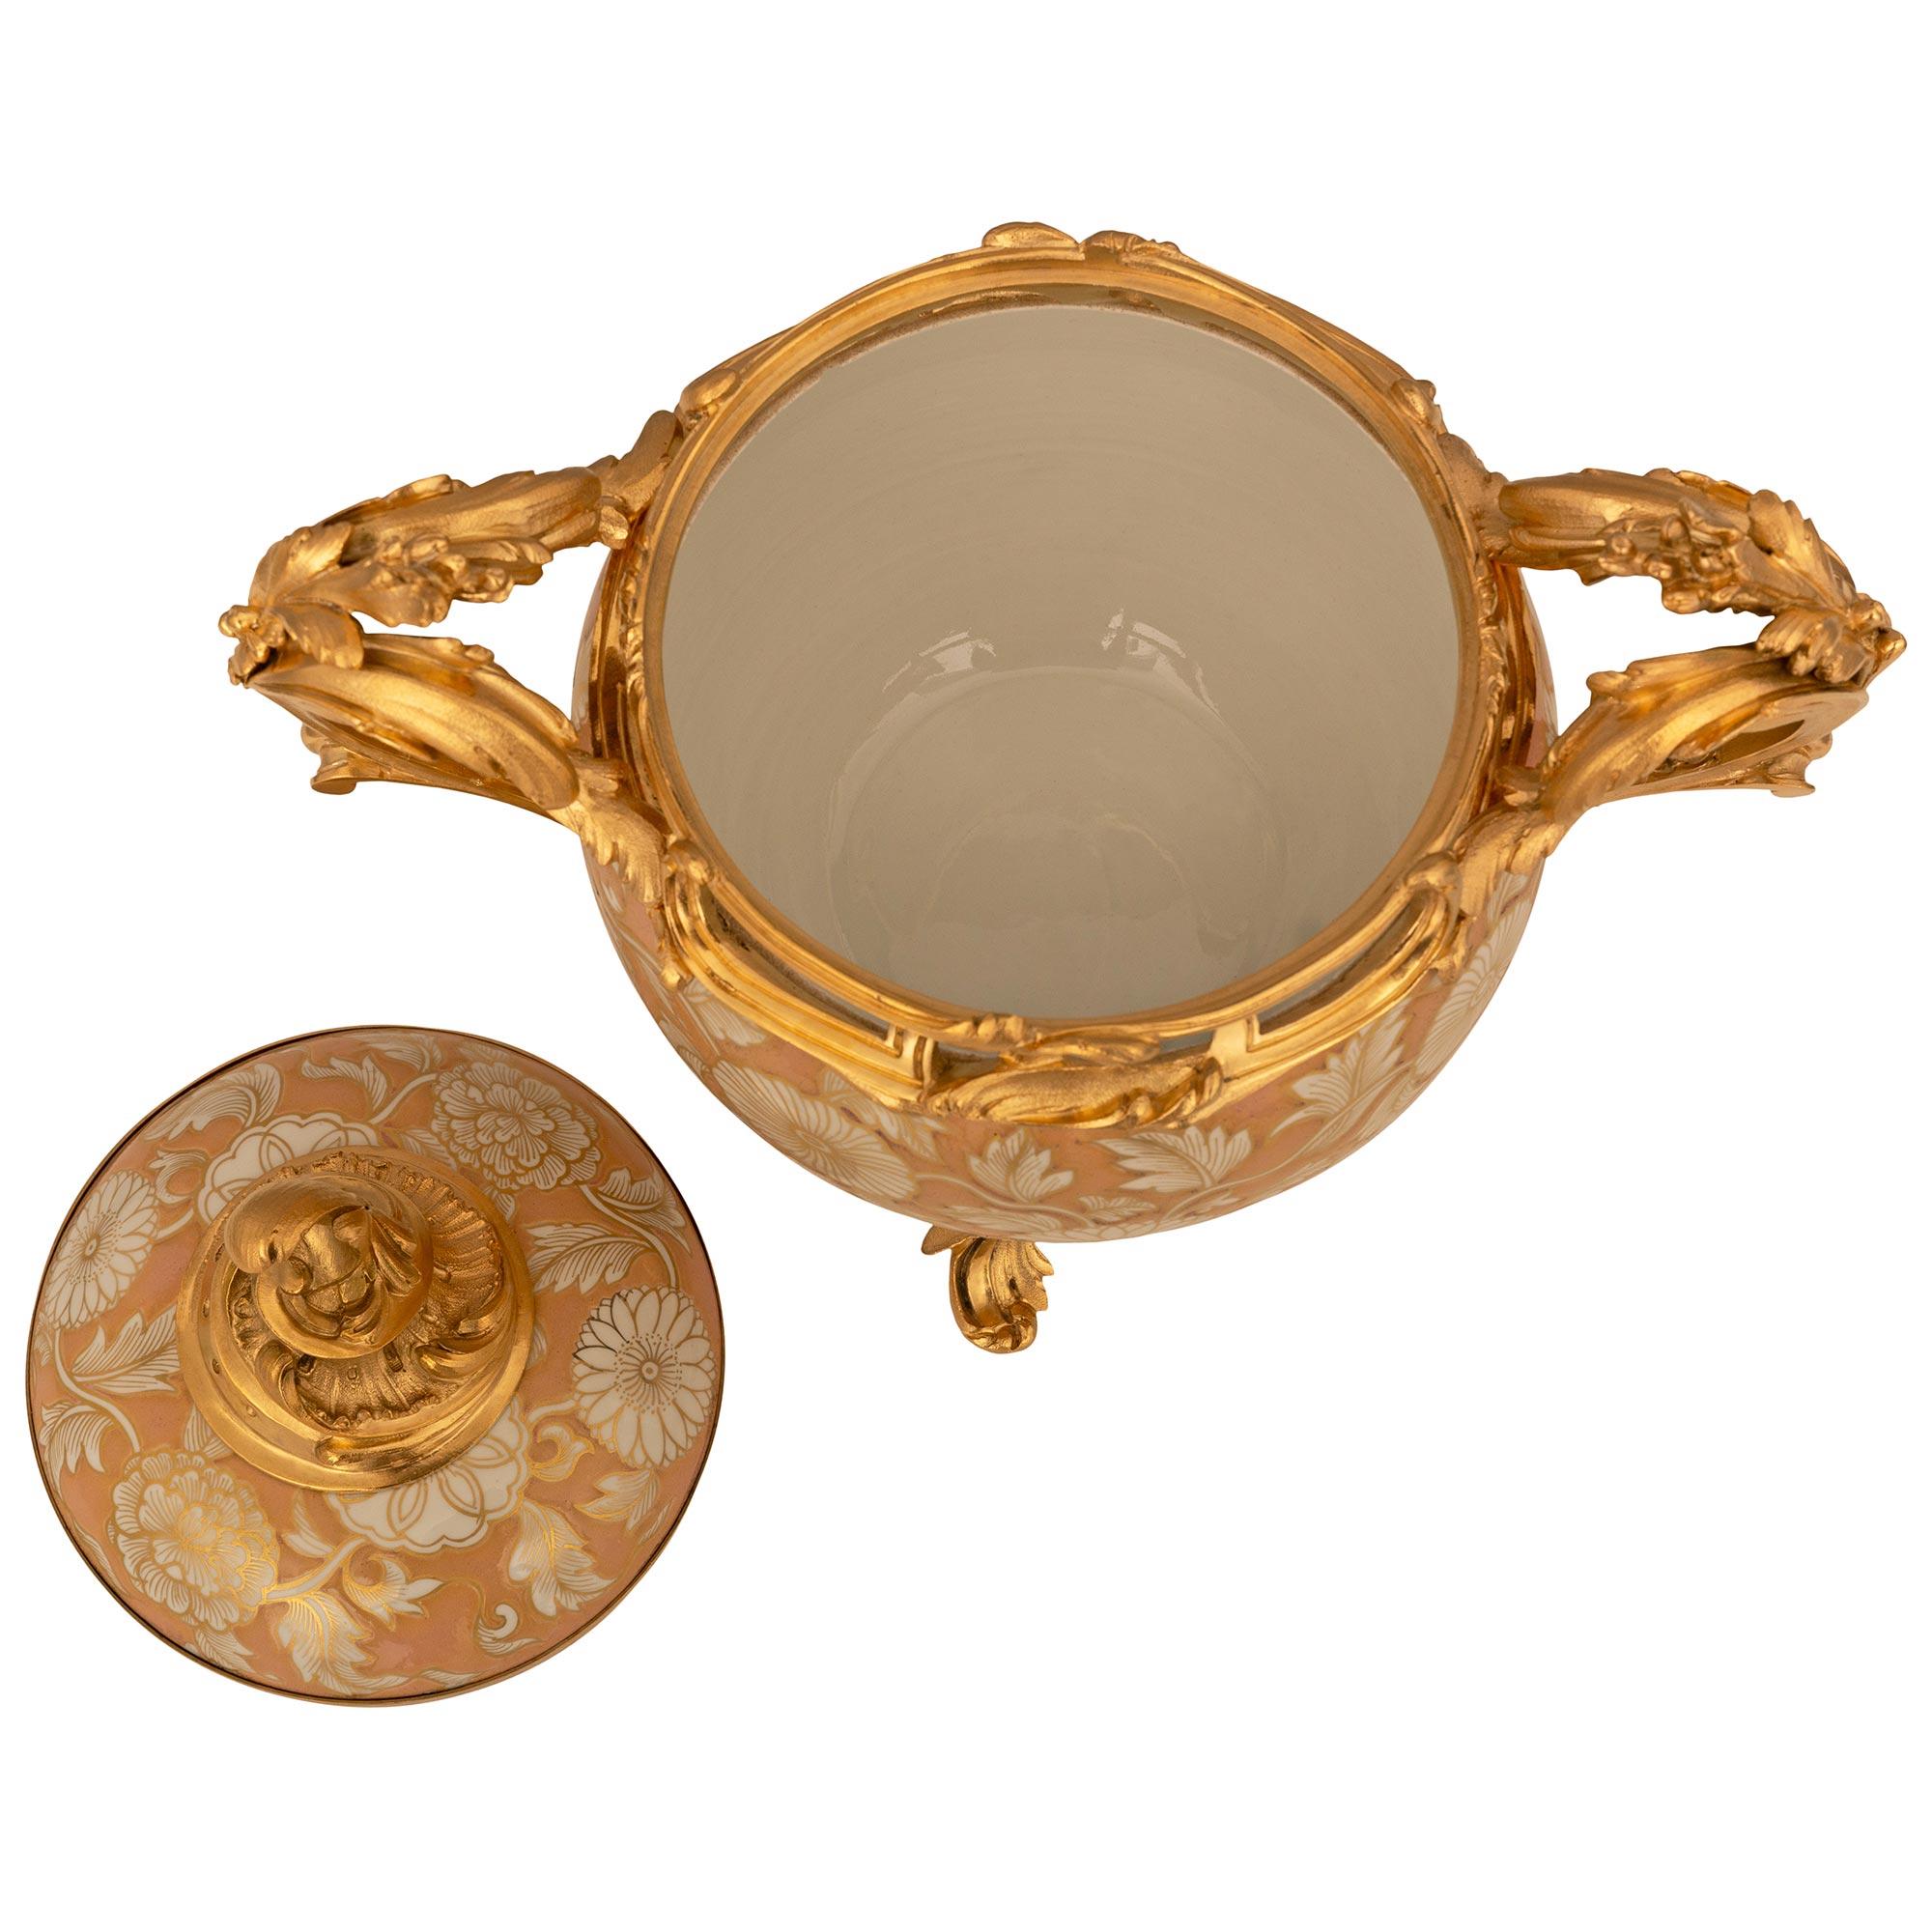 A beautifully detailed French 19th century Louis XV st. Chinese export porcelain and Ormolu lidded urn. This wonderful lidded pot pourri urn is supported by four foliate Ormolu feet connected to the wonderfully and richly chases handles on either